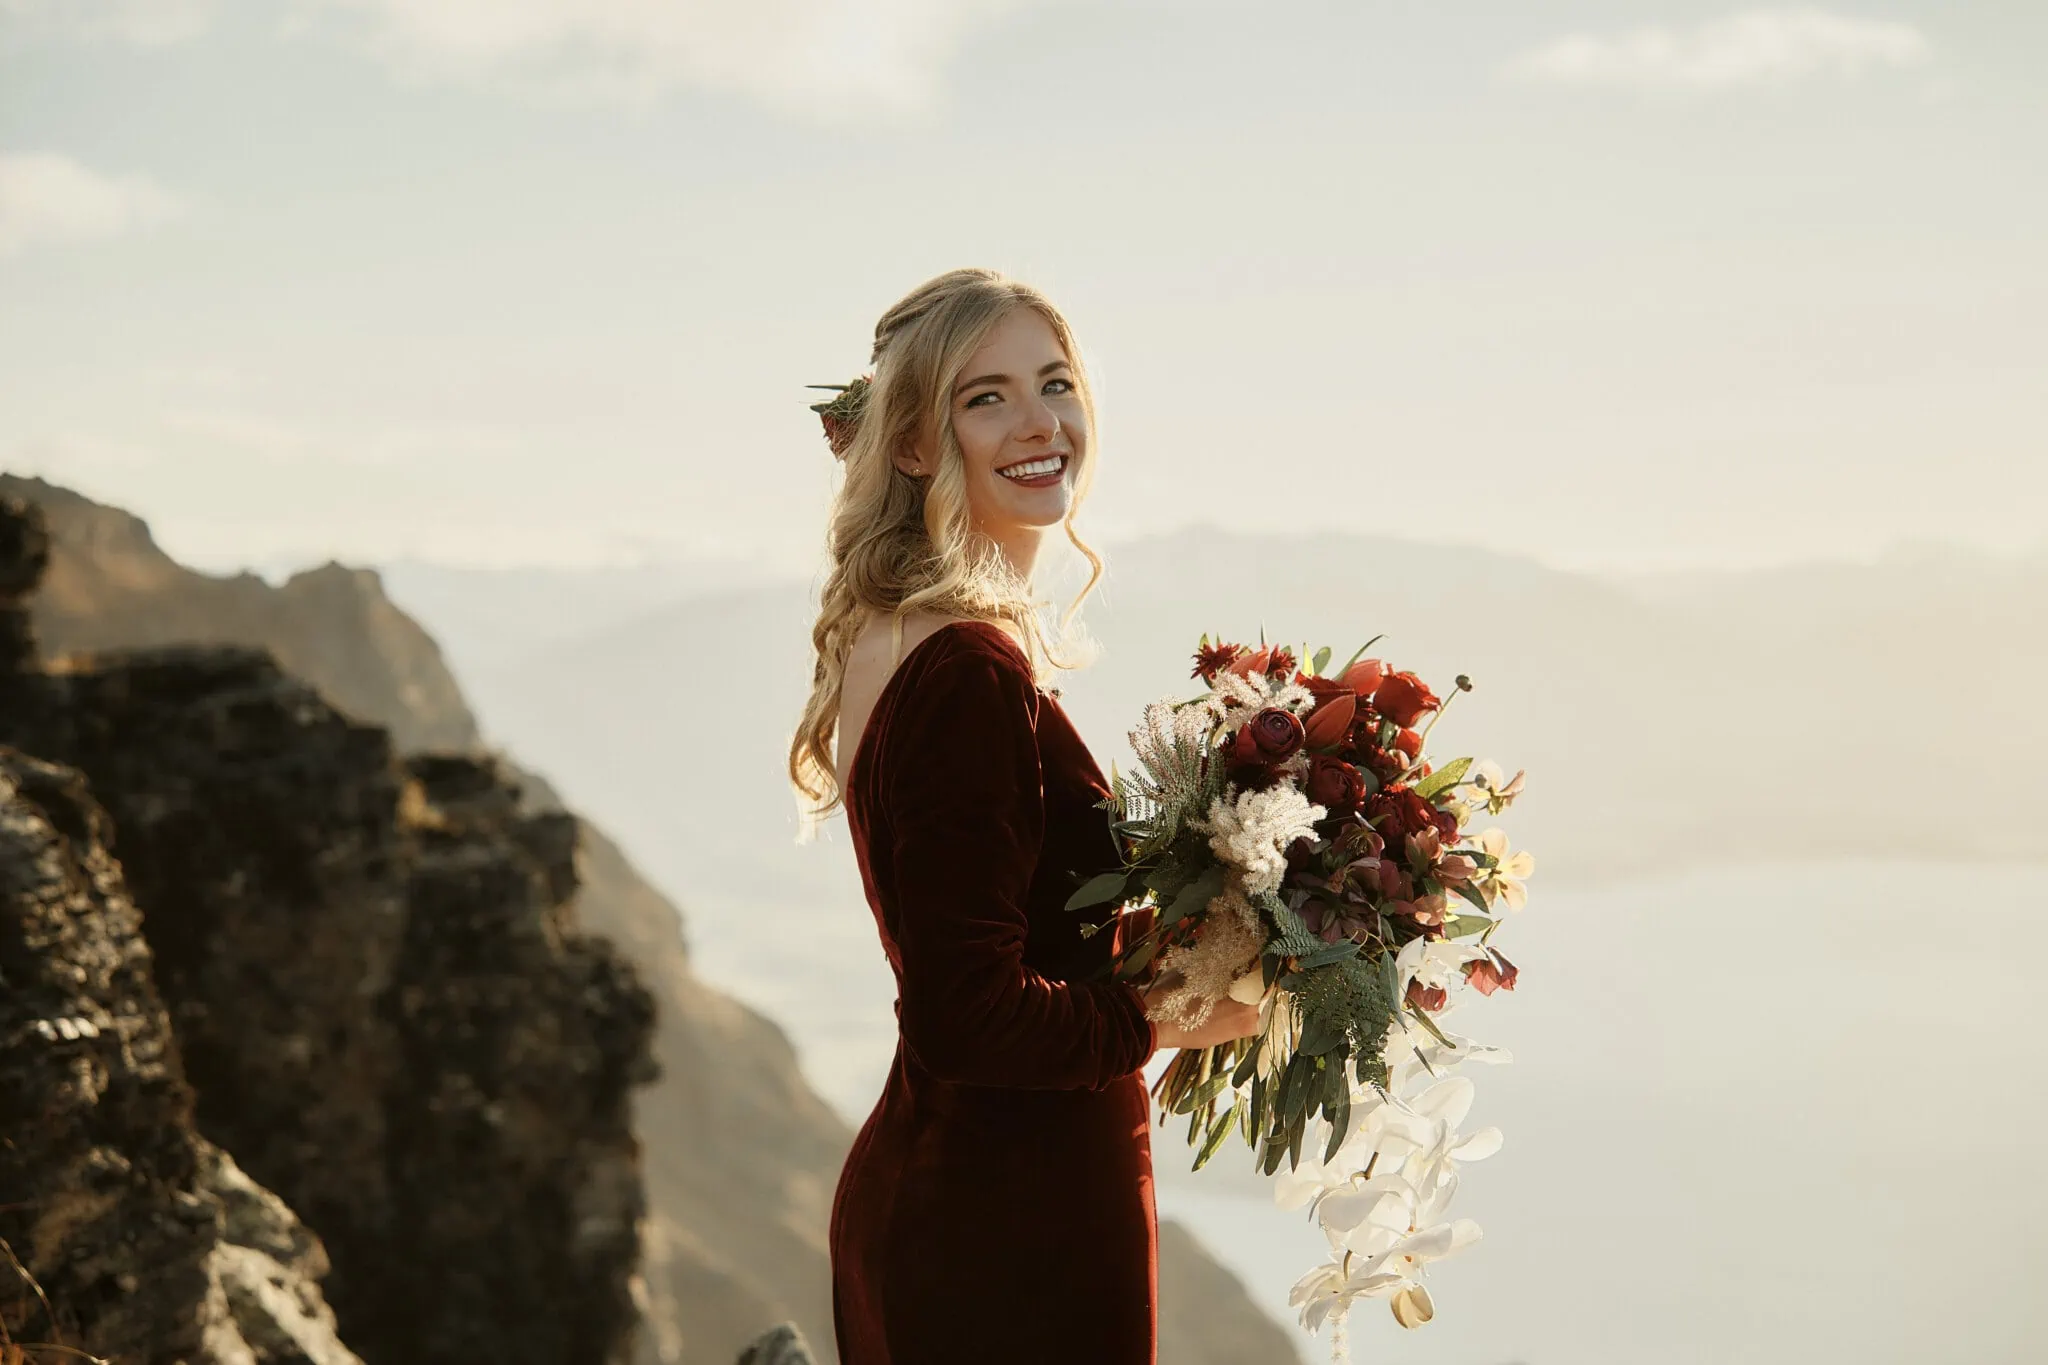 Claire and Rob's heli elopement wedding at Cecil Peak featured a stunning bride in a burgundy dress holding a bouquet on top of the mountain.